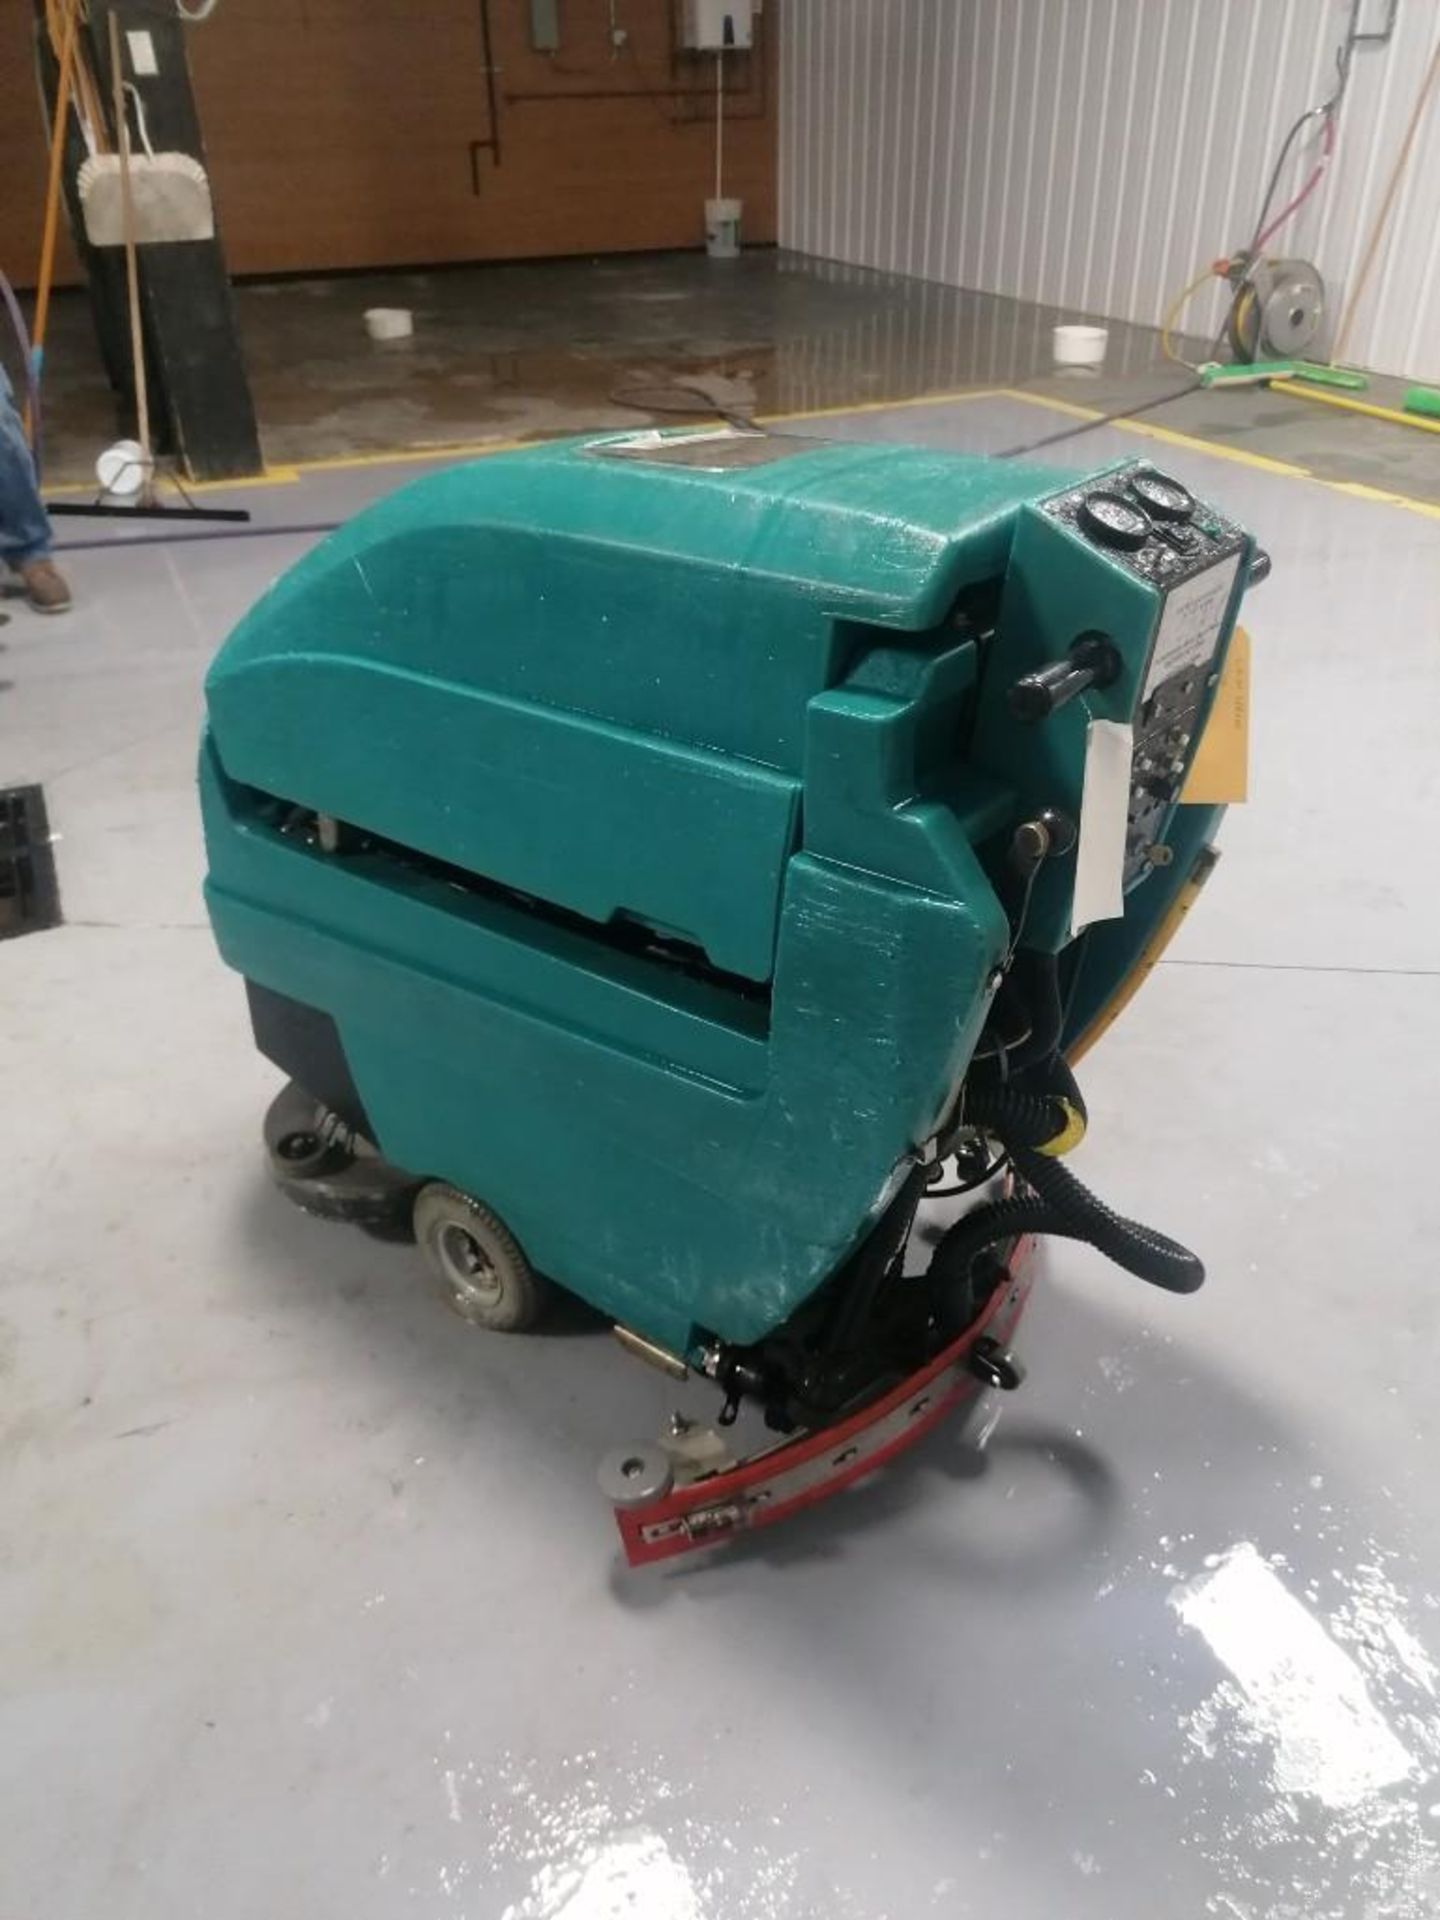 Tennant 5400 Floor Scrubber, Serial #540010229139 24 V, 21 Hours. Located in Mt. Pleasant, IA. - Image 18 of 19